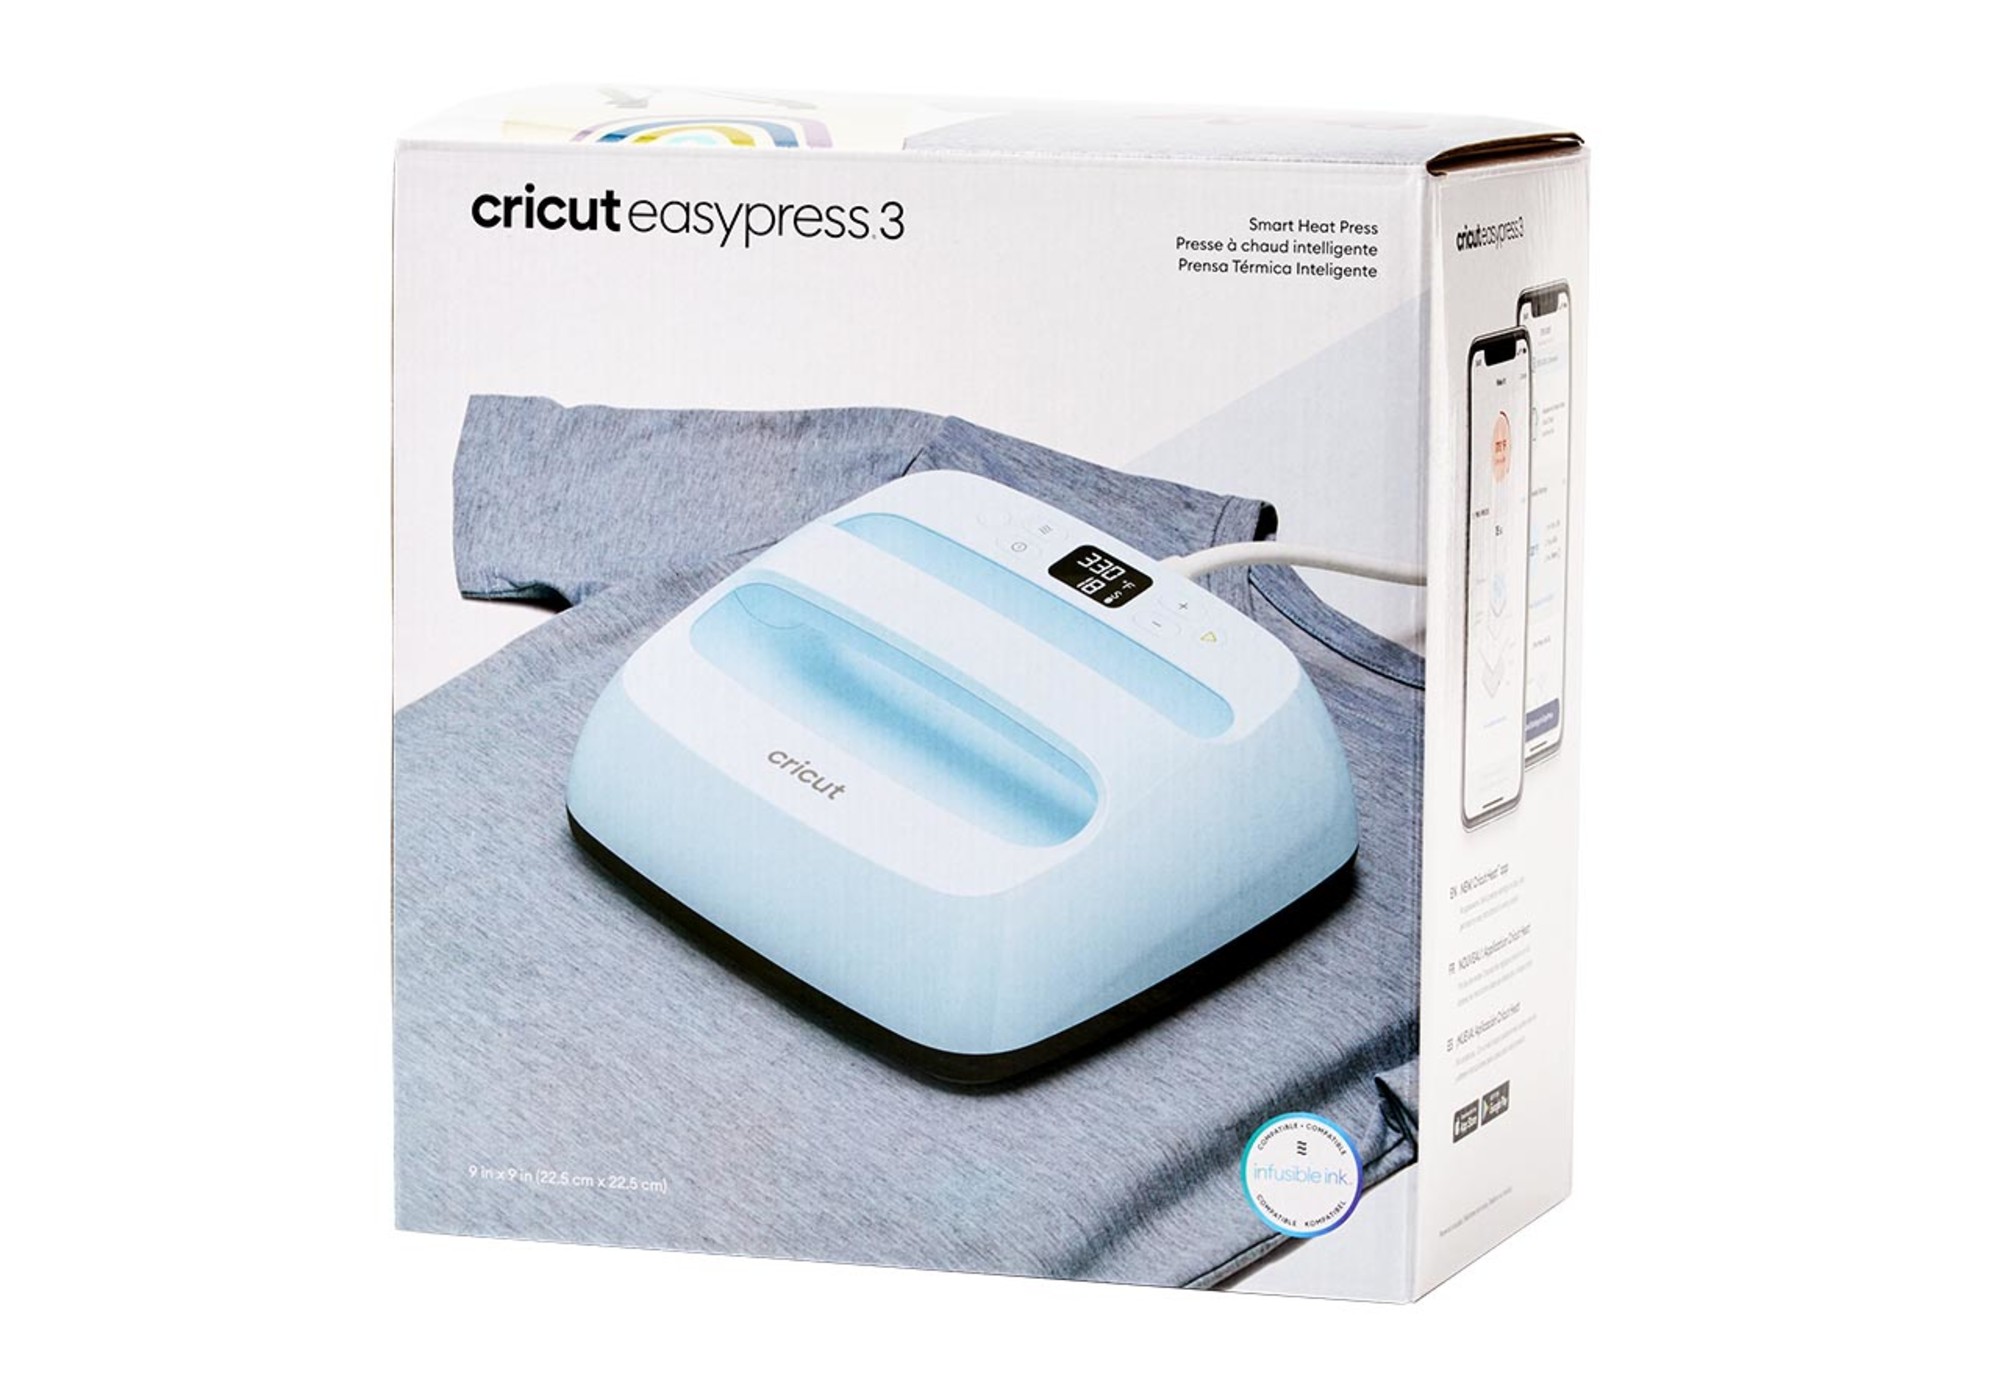 Cricut EasyPress 3 - 9 in x 9 in - Bluetooth-Enabled Handheld Heat Press - image 3 of 11